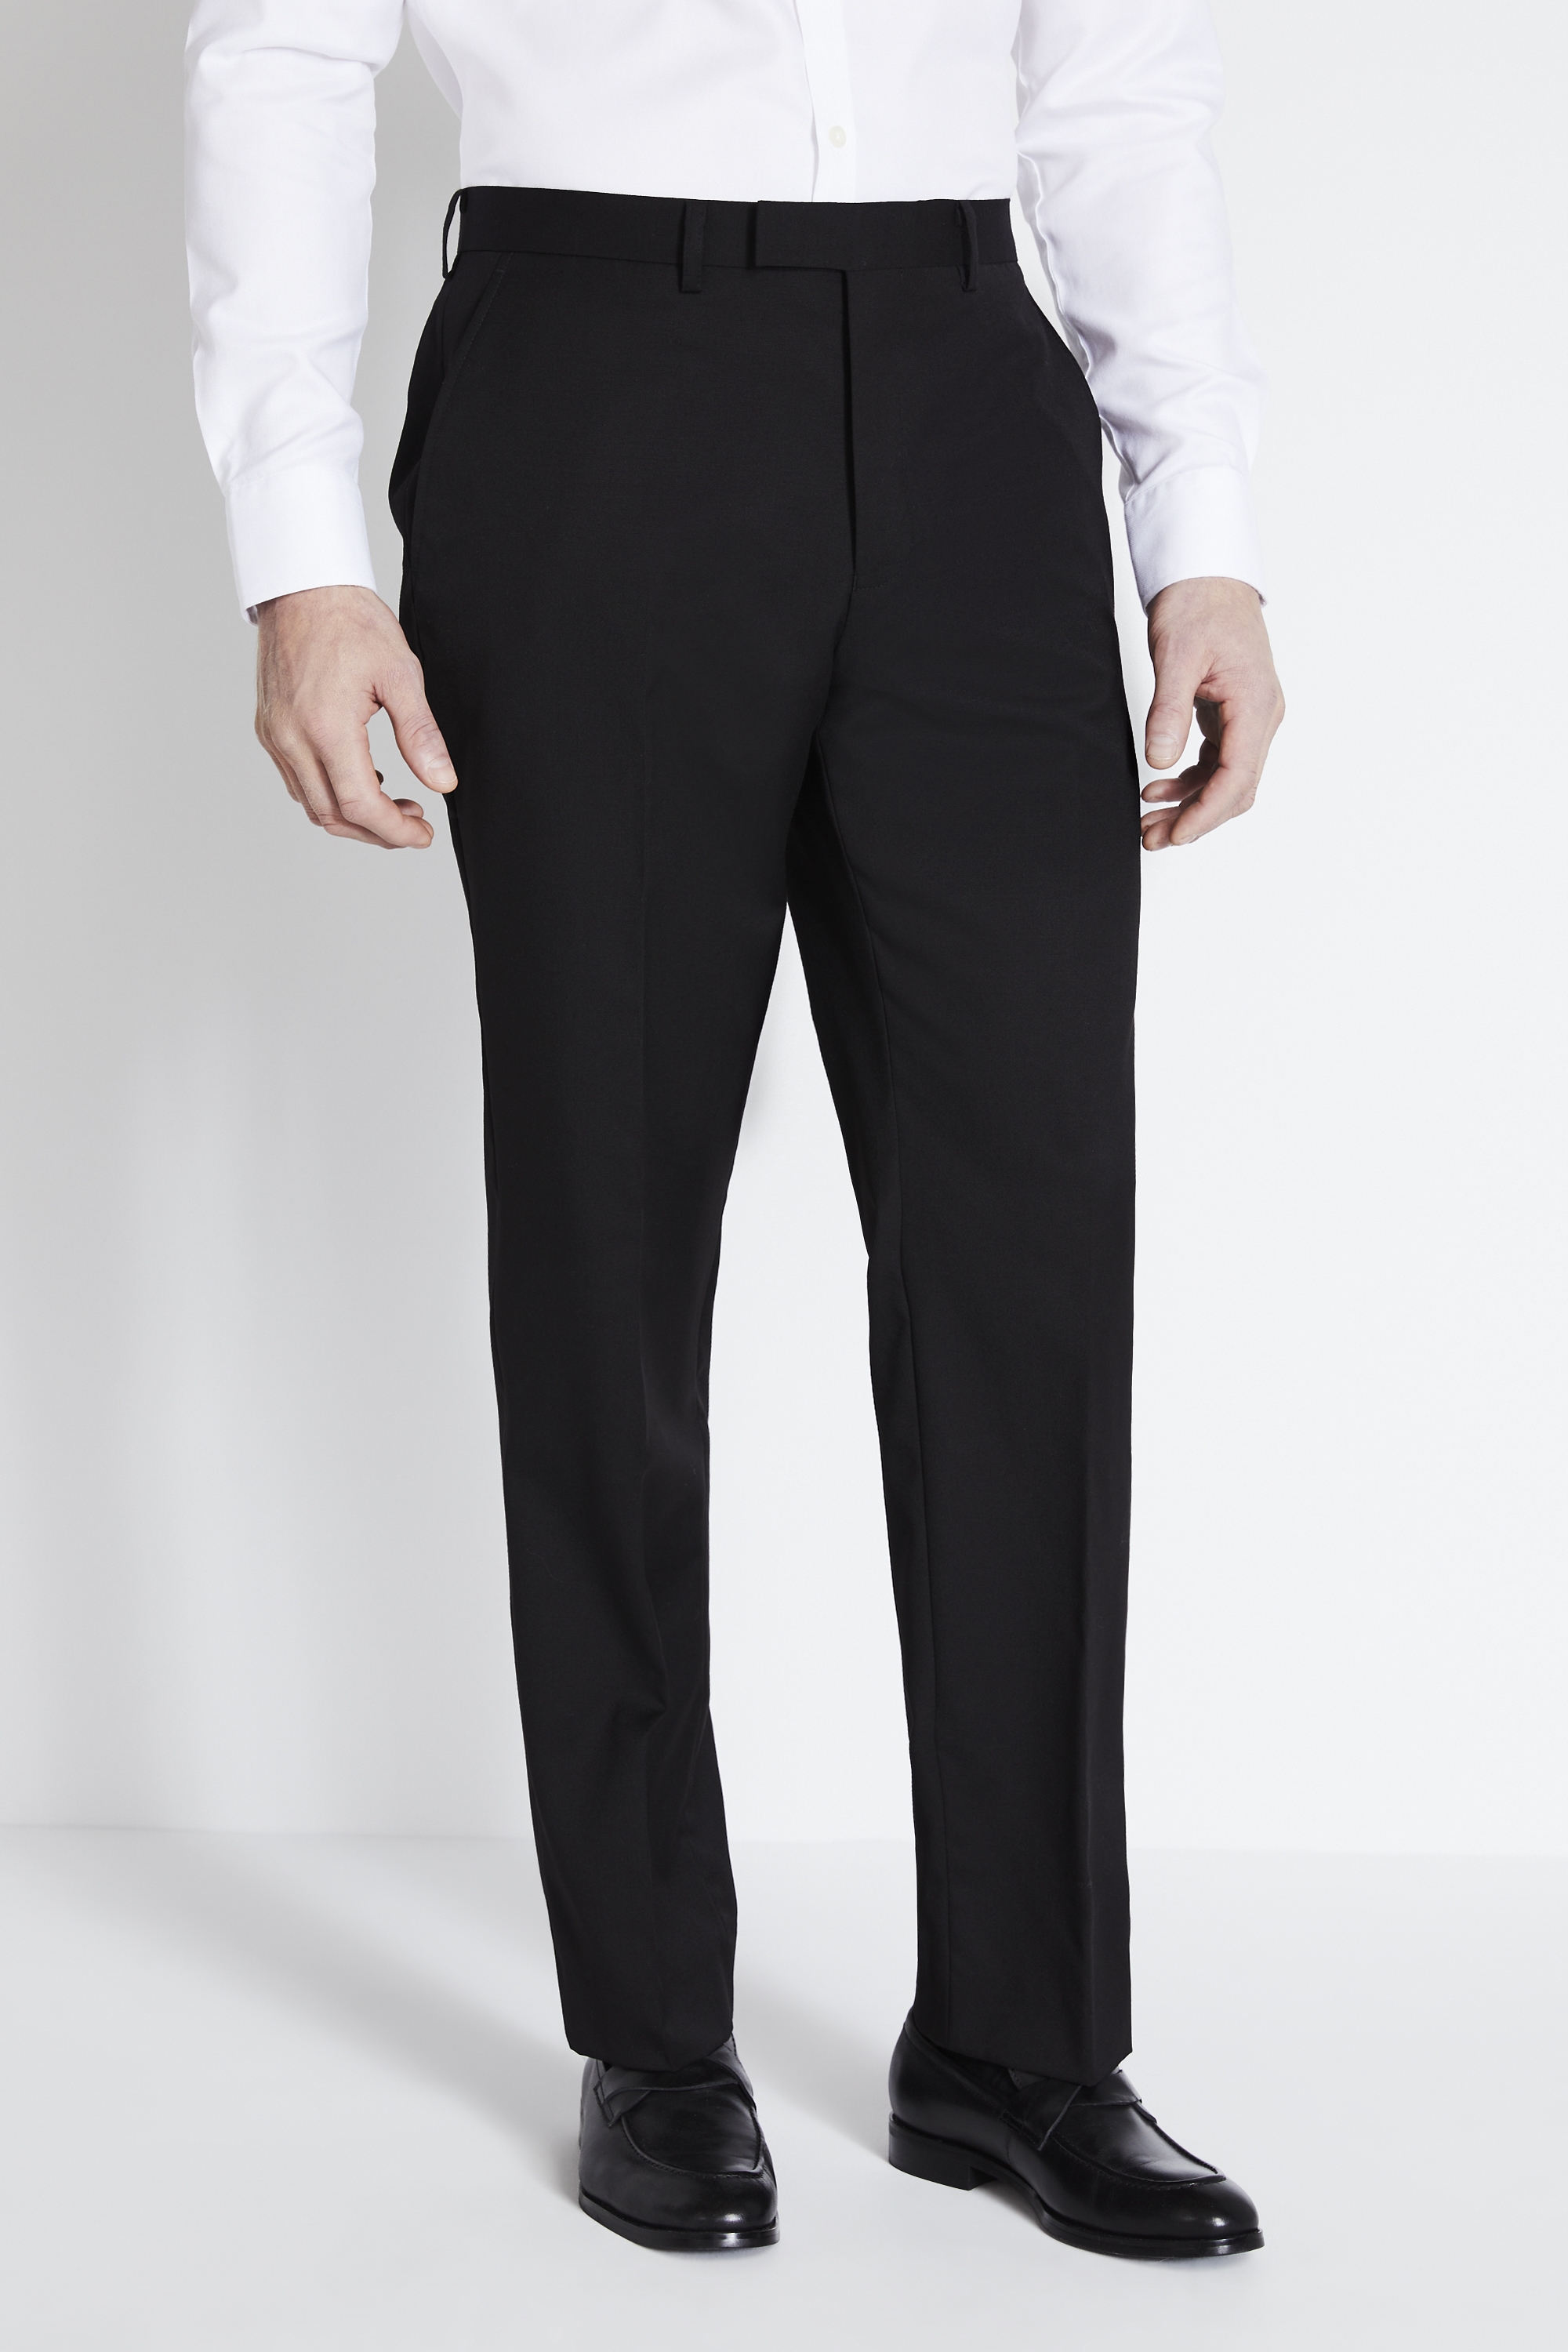 Regular Fit Black Twill Trousers | Buy Online at Moss